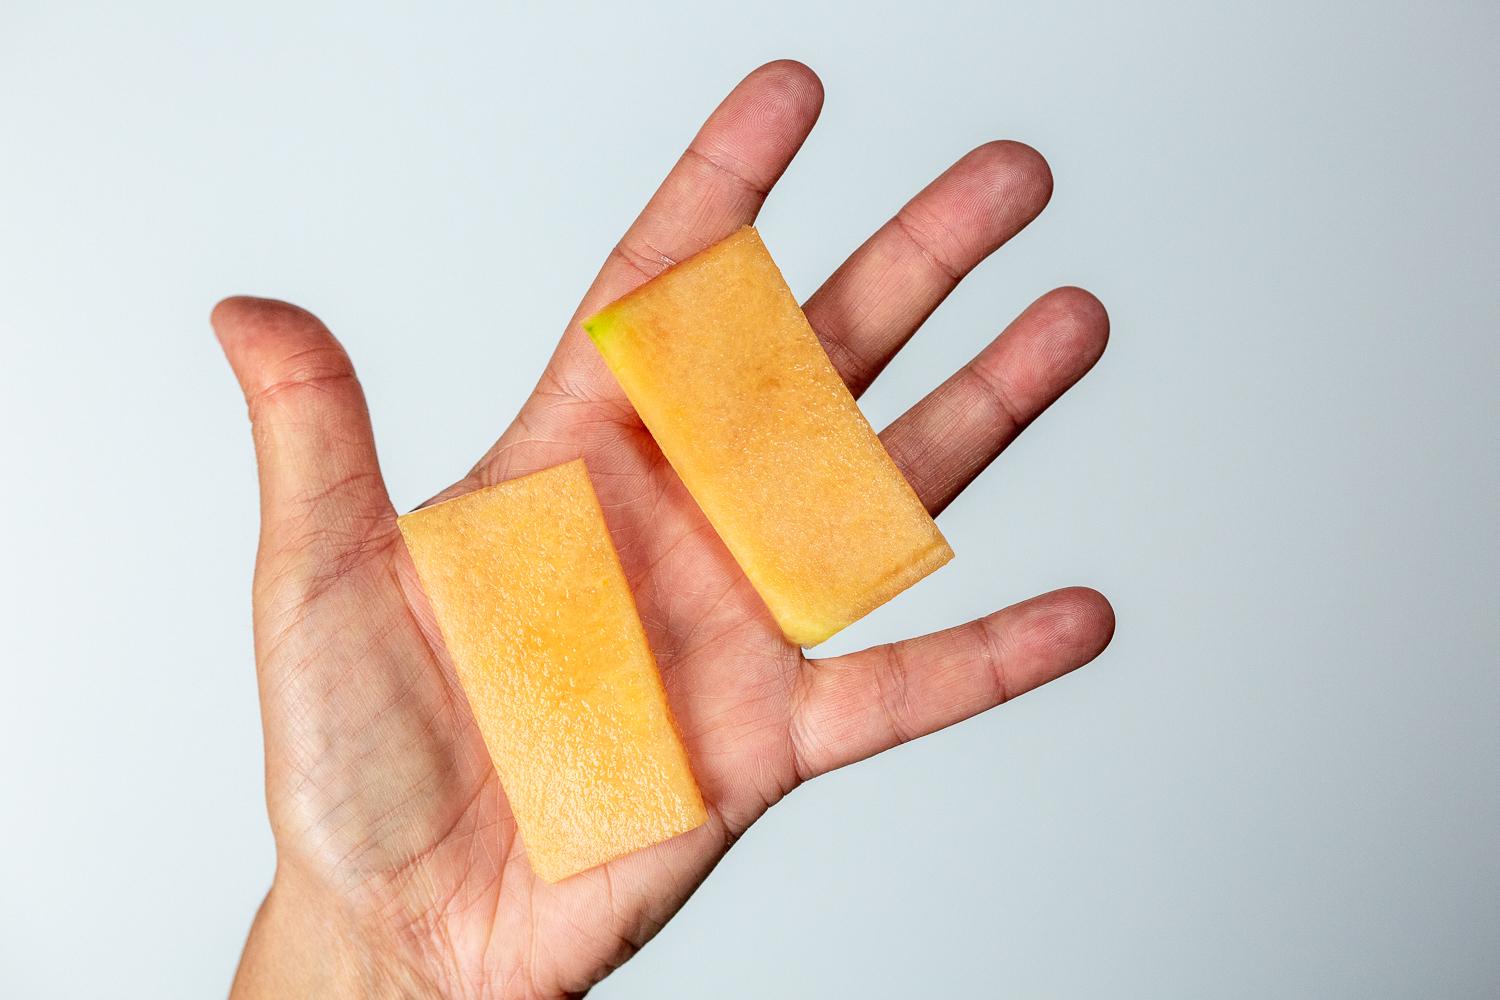 a hand holding two thin rectangular slices of cantaloupe